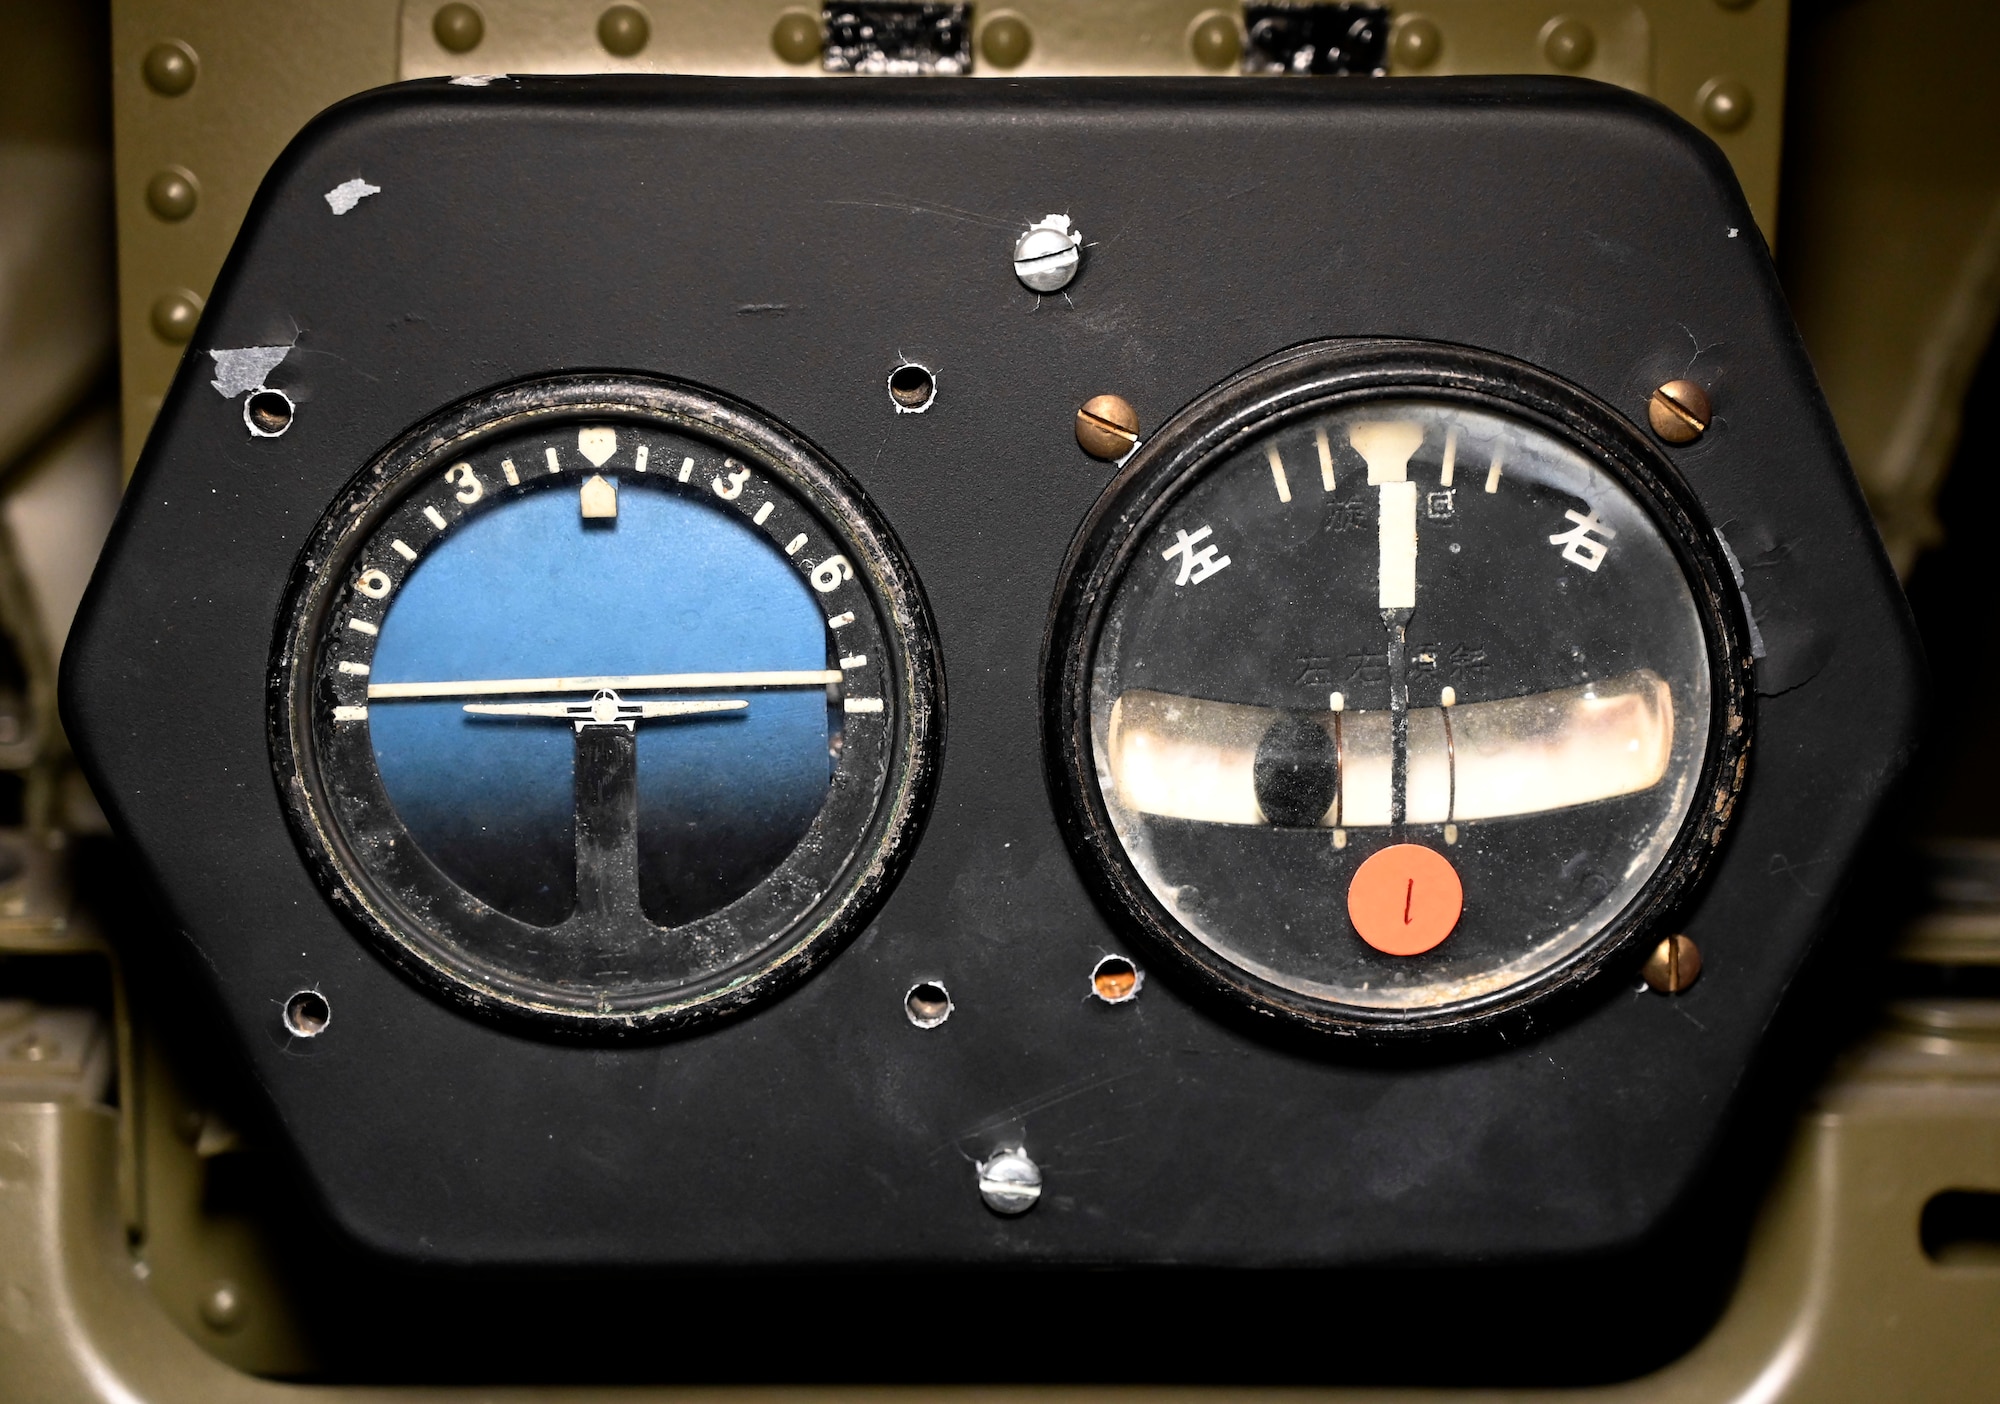 Interior view of the Mitsubishi A6M2 Zero at the National Museum of the U.S. Air Force World War II Gallery.